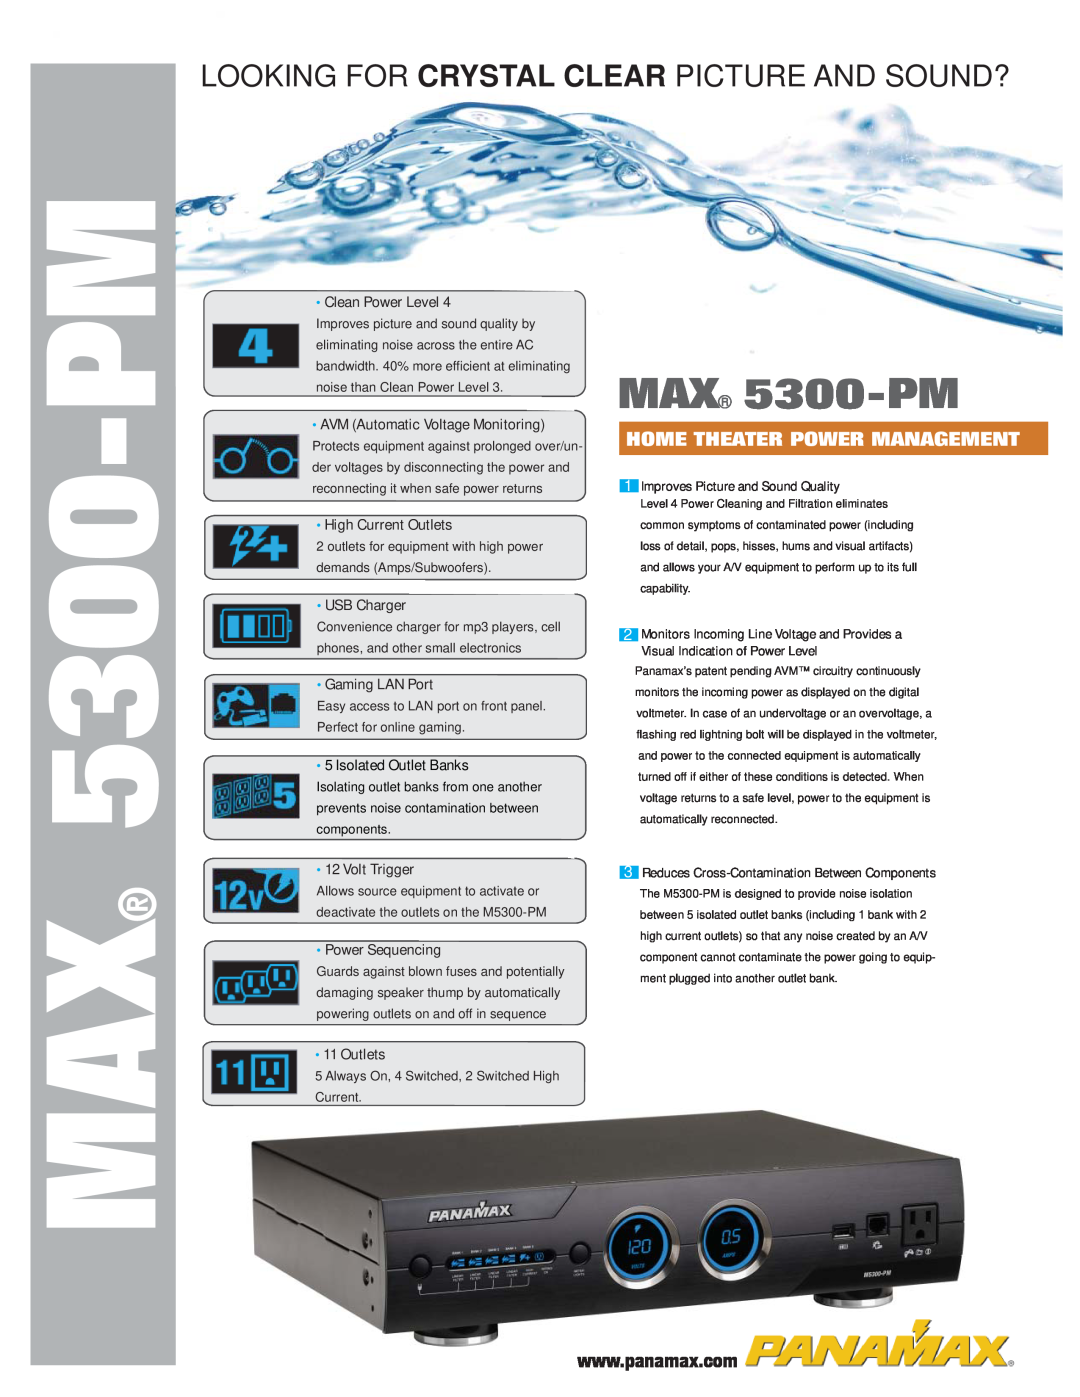 Panamax MAX 5300-PM manual PM-5300, Looking For Crystal Clear Picture And Sound?, Home Theater Power Management, Outlets 